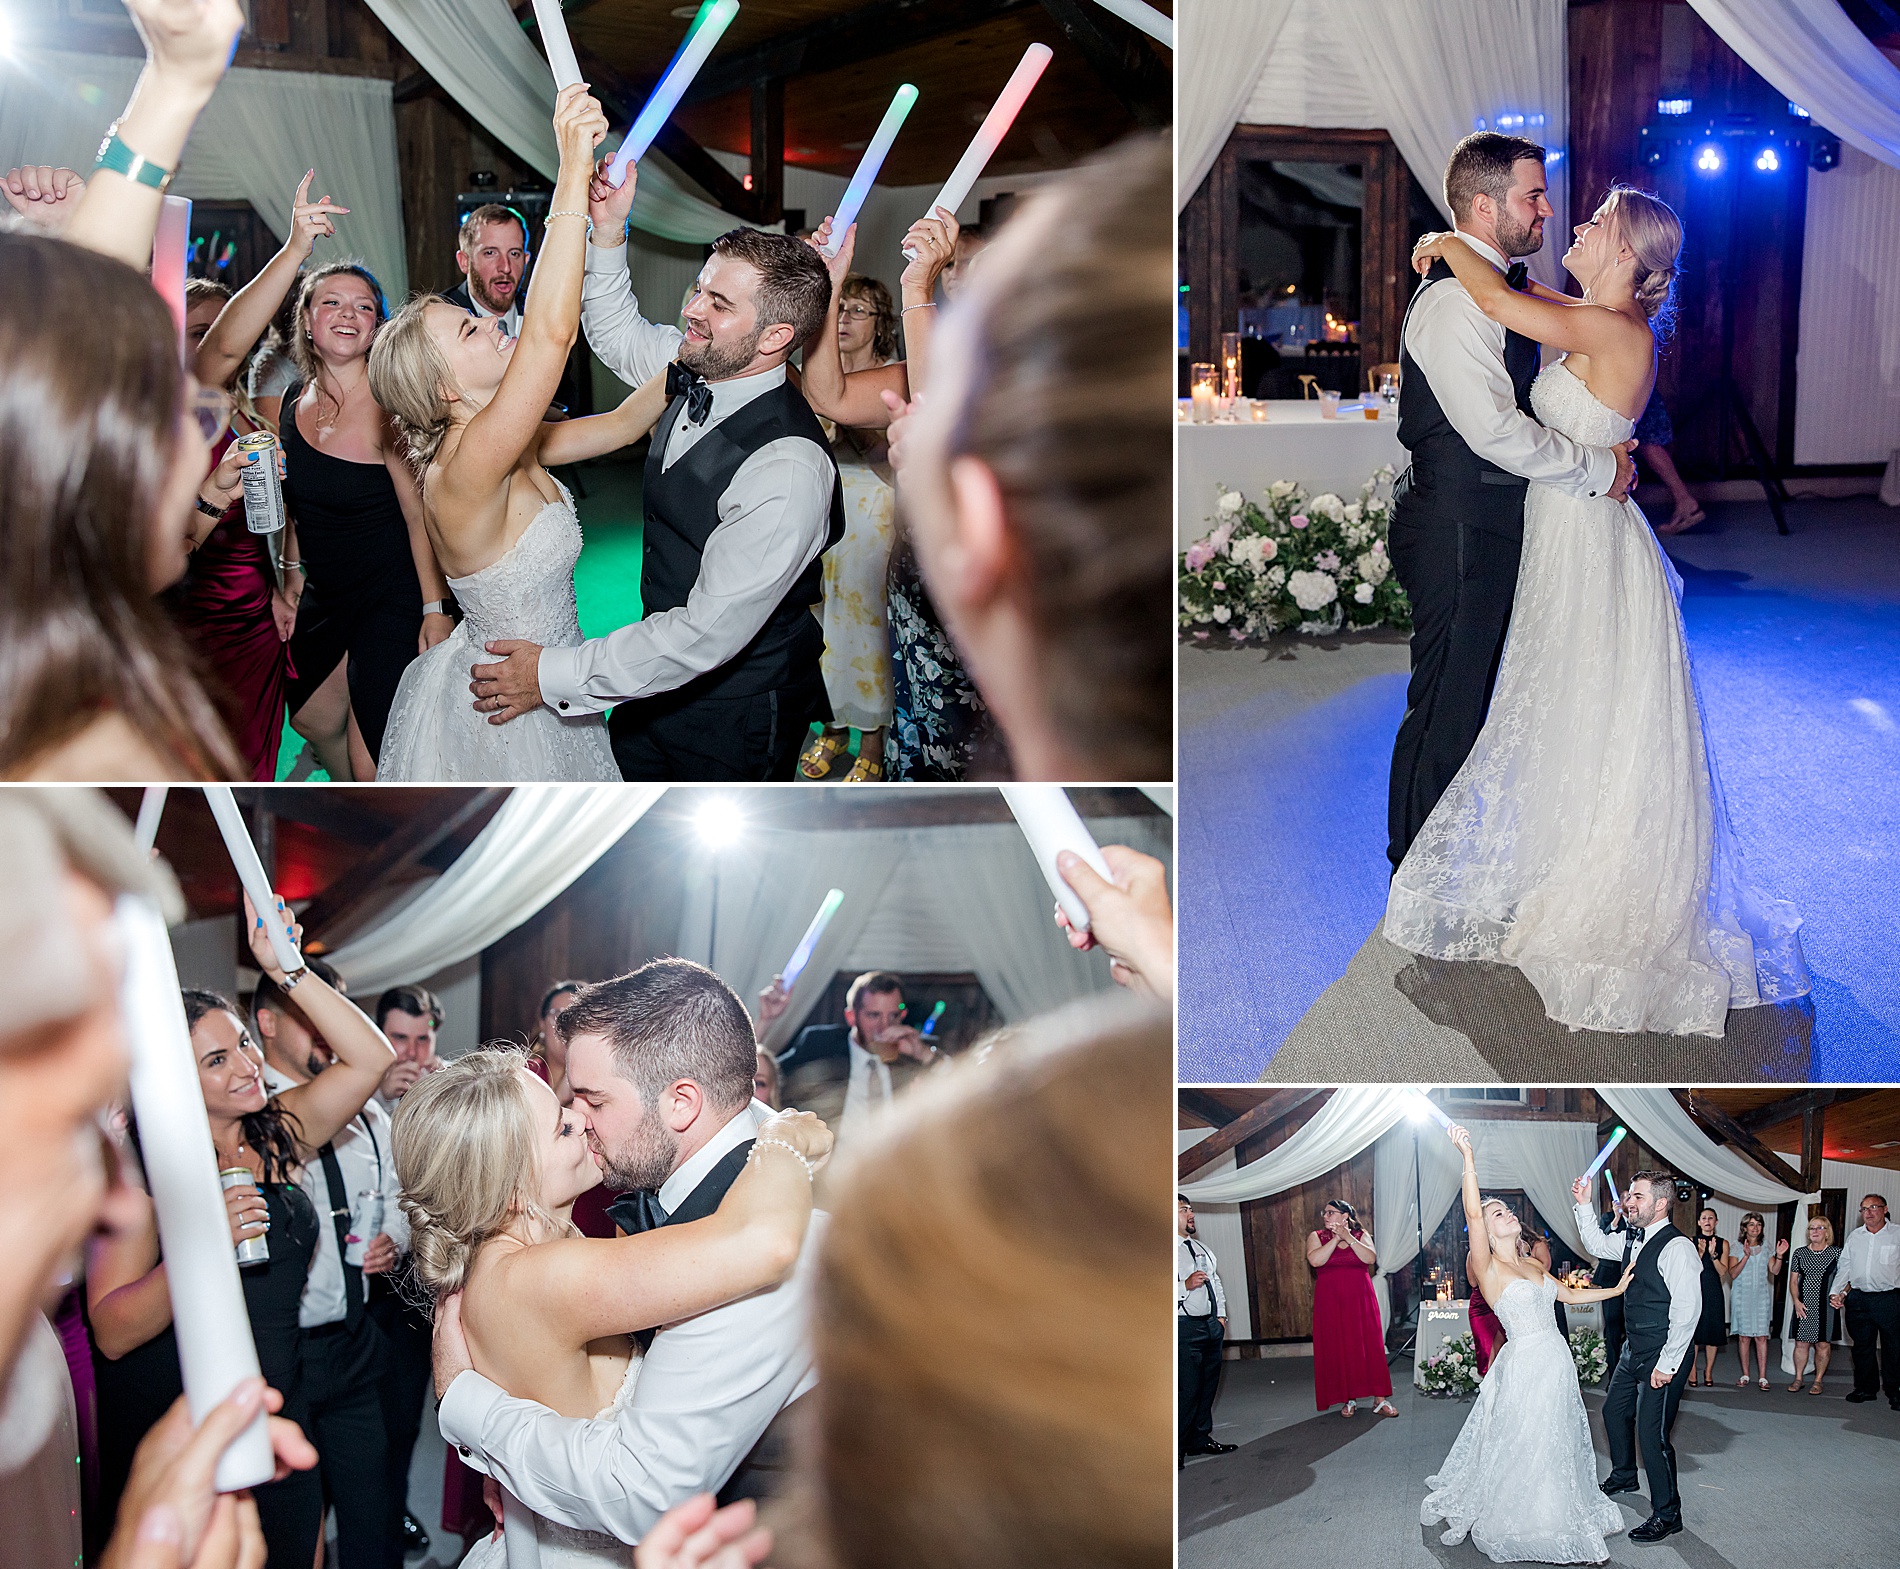 bride and groom dance the night away with wedding guests